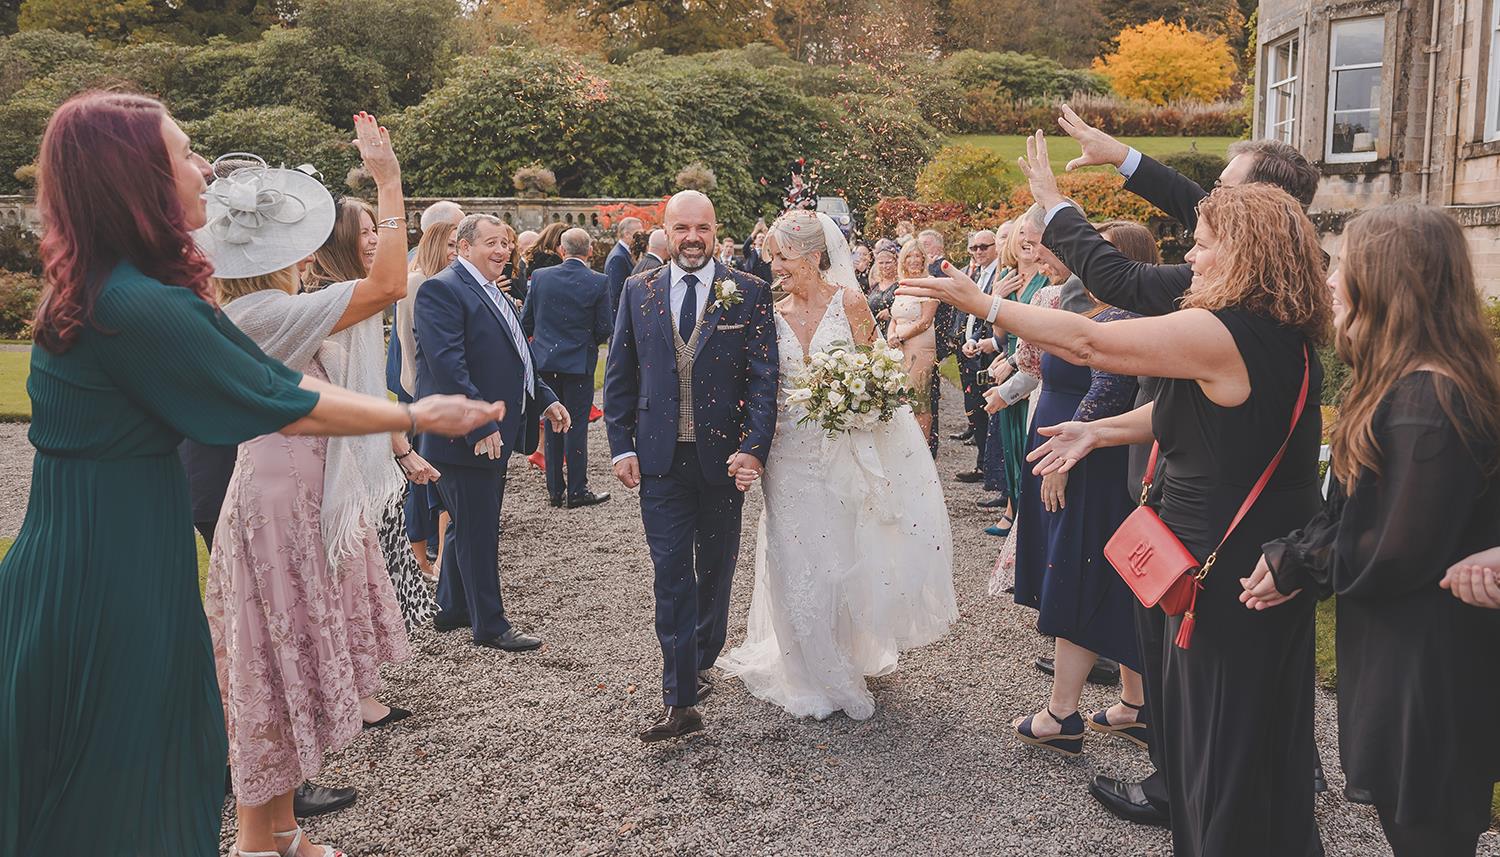 Walking along path with confetti being thrown. Photo Credit: Duncan Ireland Photography